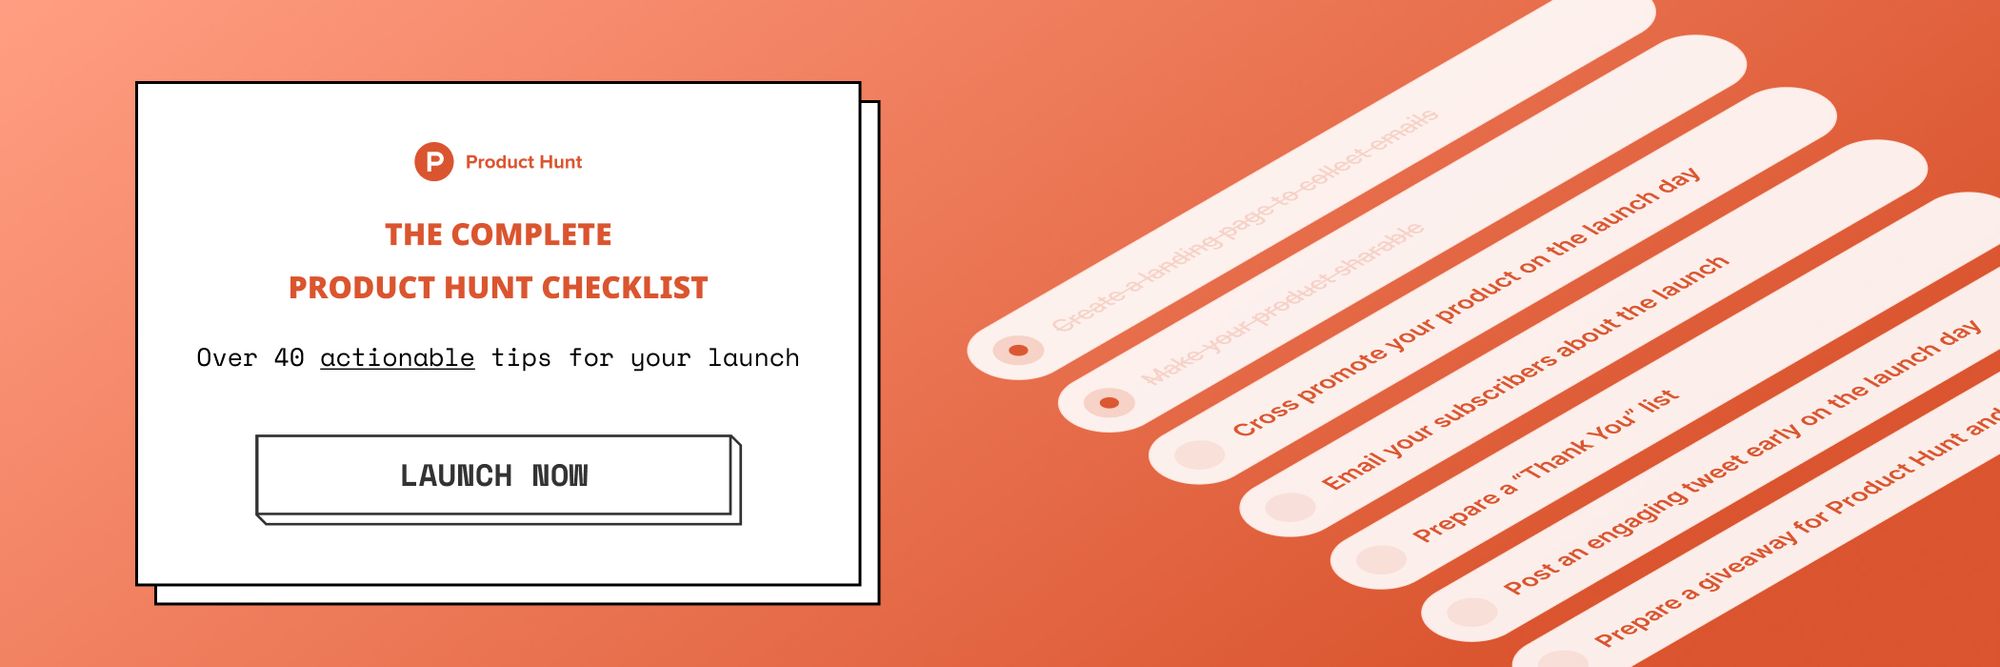 The complete Product Hunt Checklist by Jim Raptis